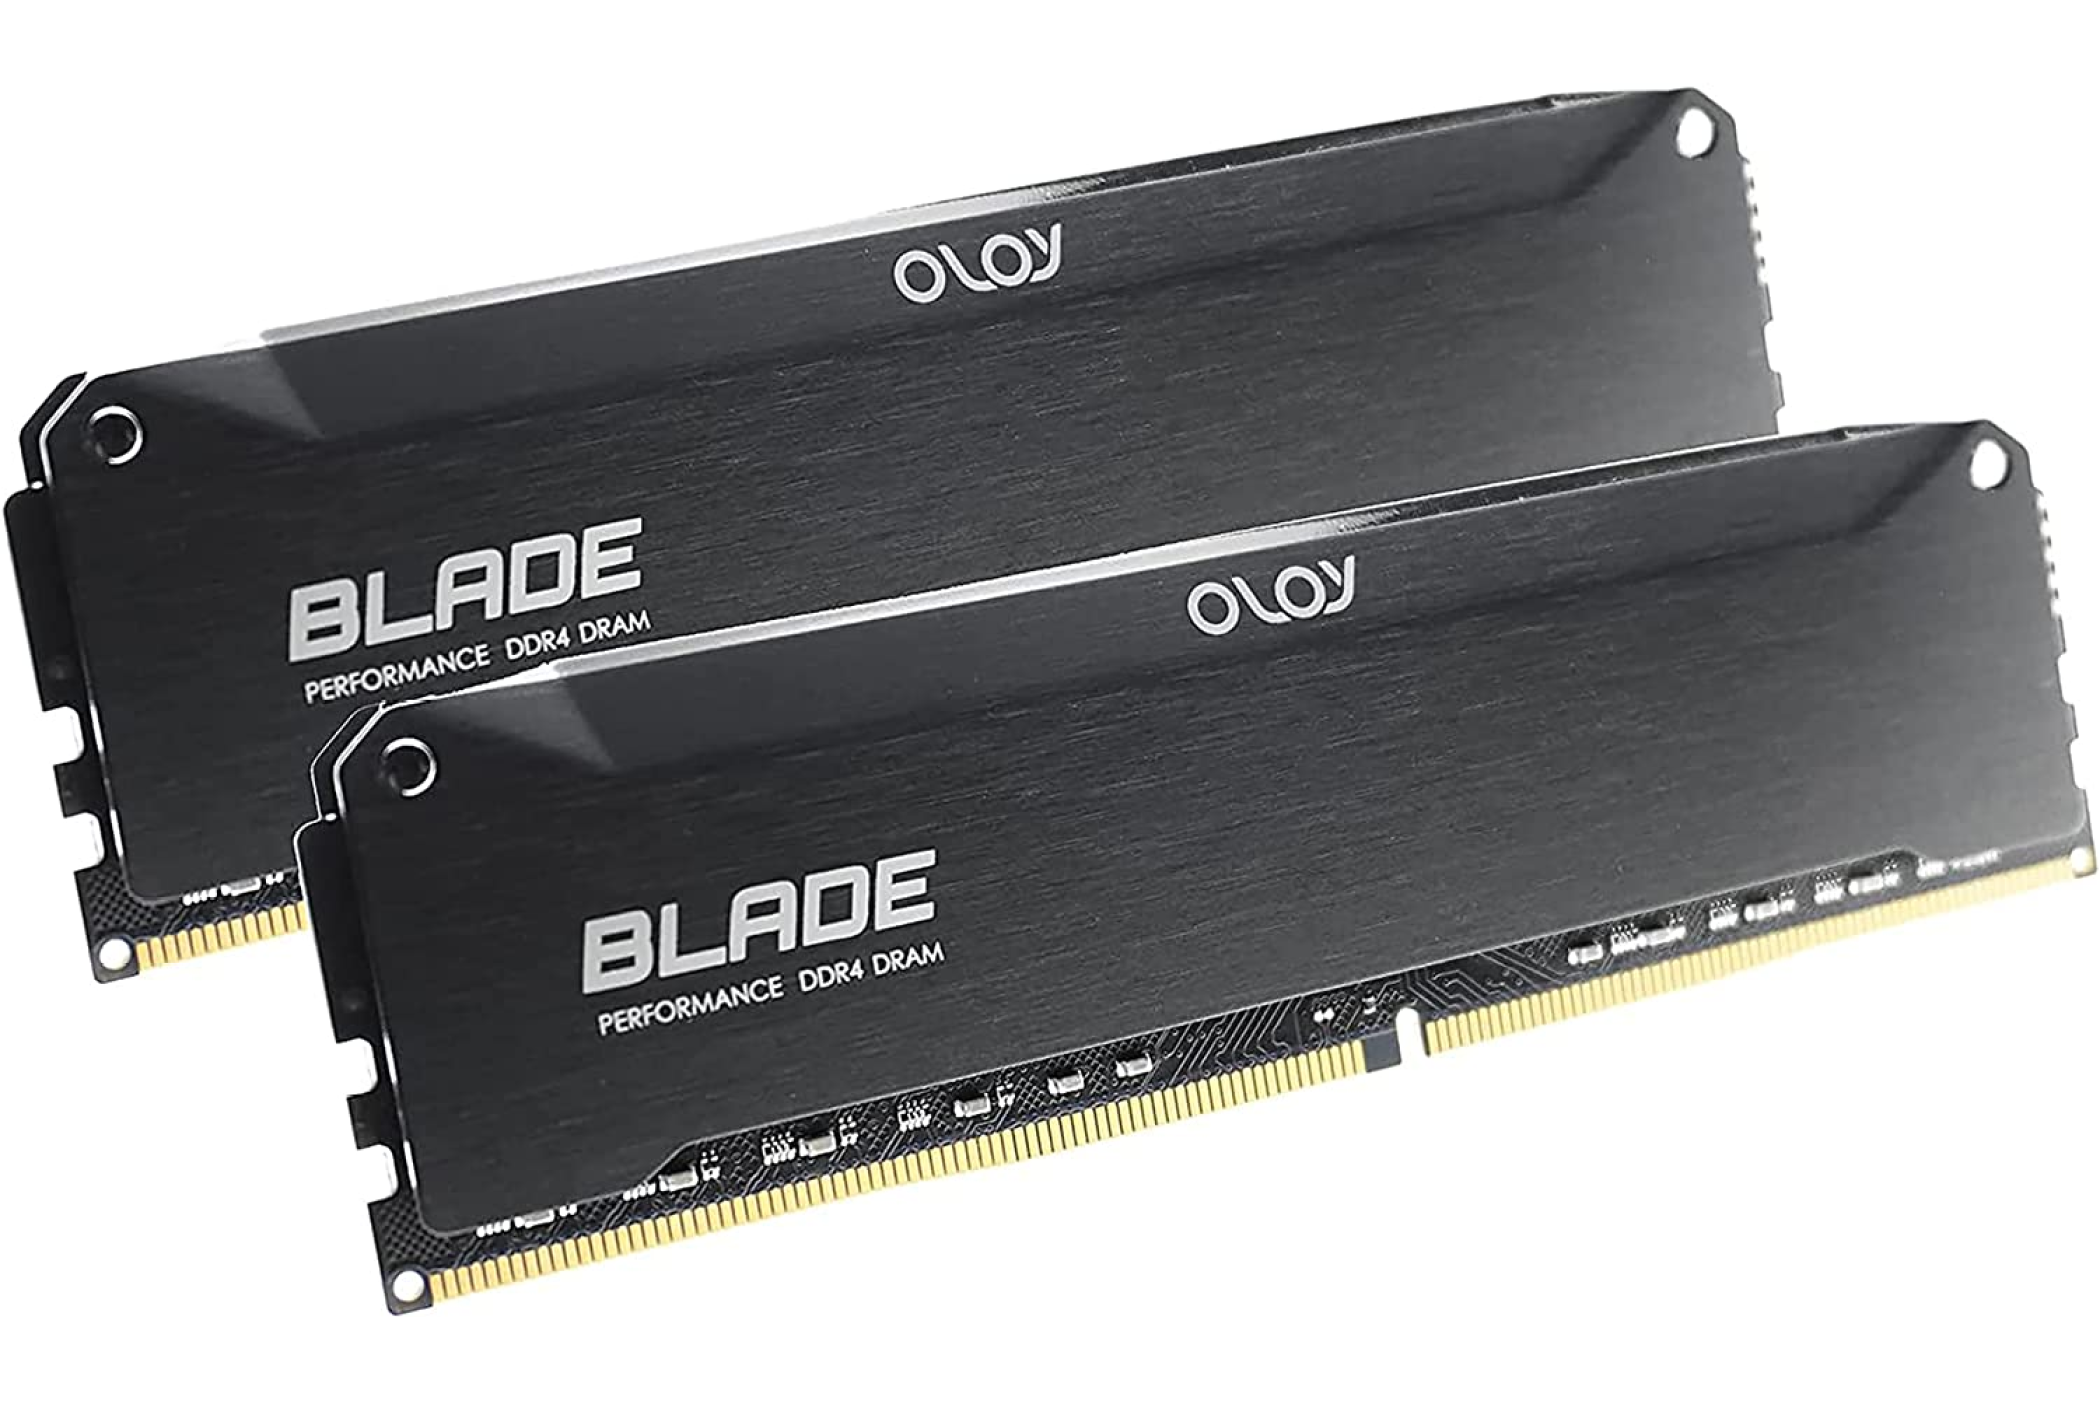 A kit of Oloy Blade DDR4 memory.